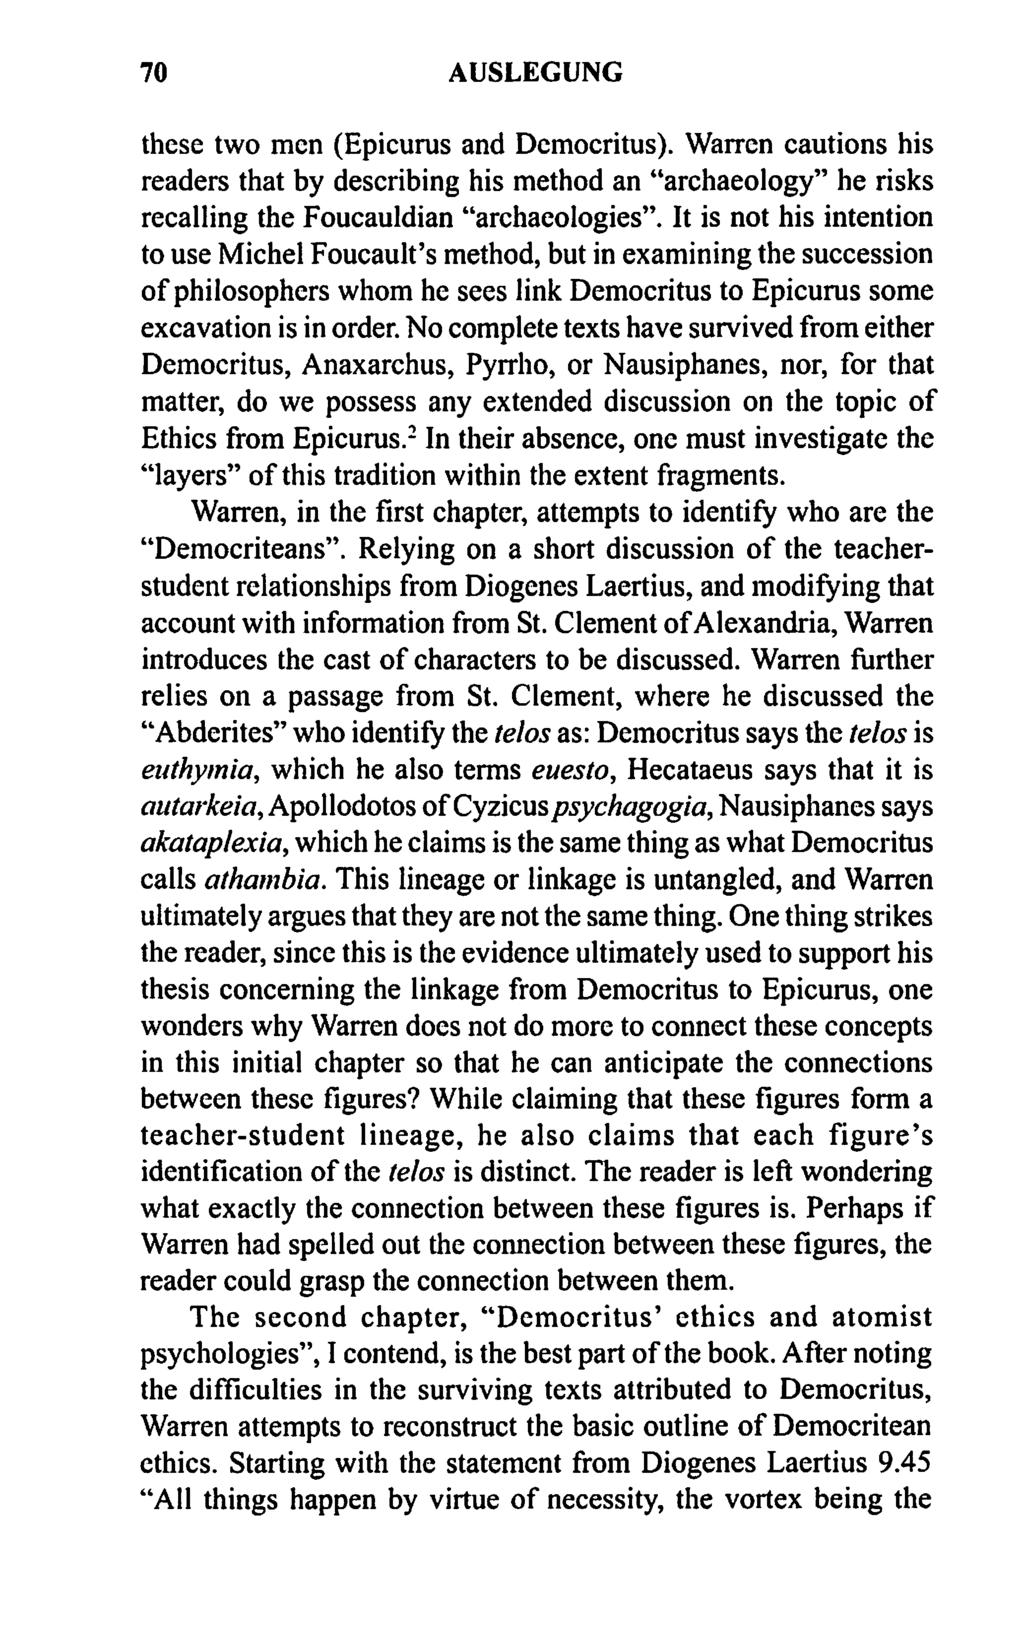 70 AUSLEGUNG these two men (Epicurus and Democritus). Warren cautions his readers that by describing his method an "archaeology" he risks recalling the Foucauldian "archaeologies".